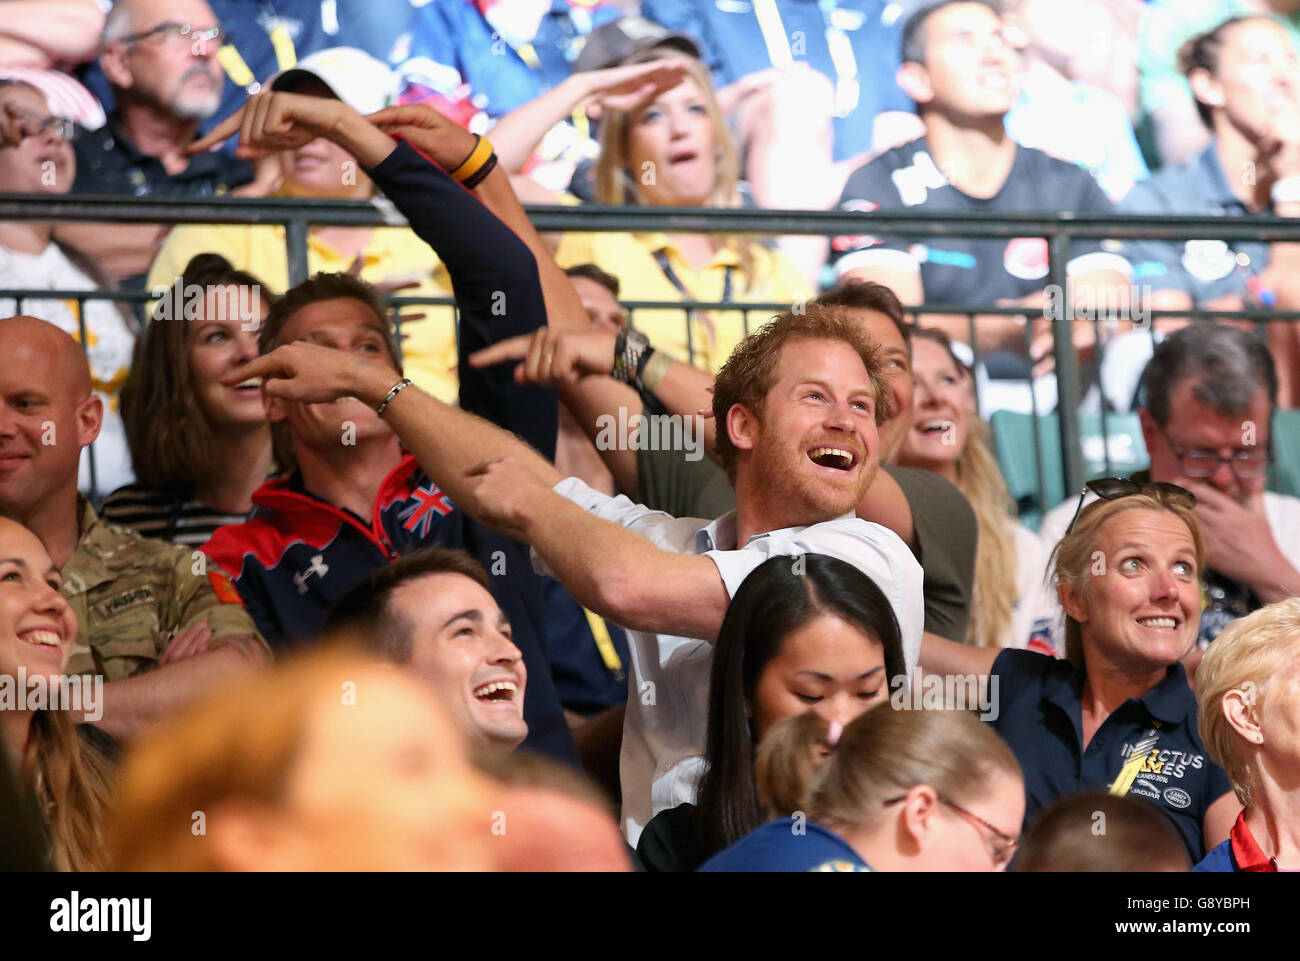 Prince Harry is caught on 'Salute Cam' during the GBR Vs Australia wheelchair rugby match at the Invictus Games Orlando 2016 at ESPN Wide World of Sports in Orlando, Florida. Stock Photo